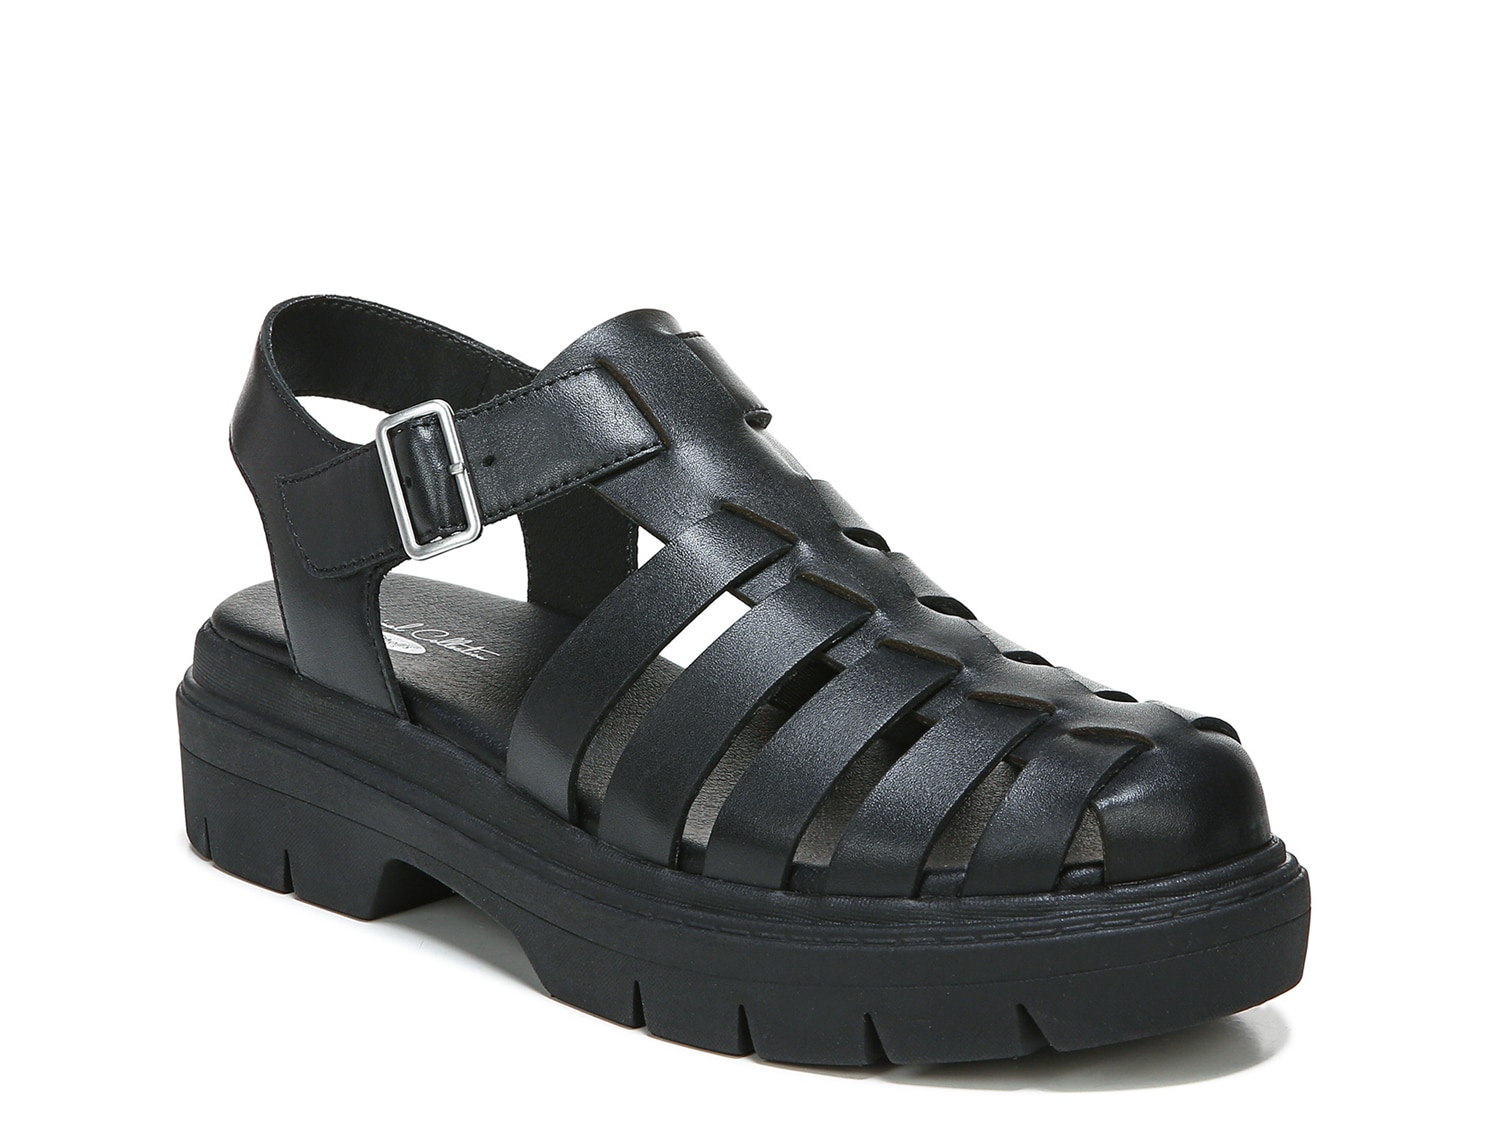 Dr. Scholl's Original Collection Cannot Wait Sandal - Free Shipping | DSW